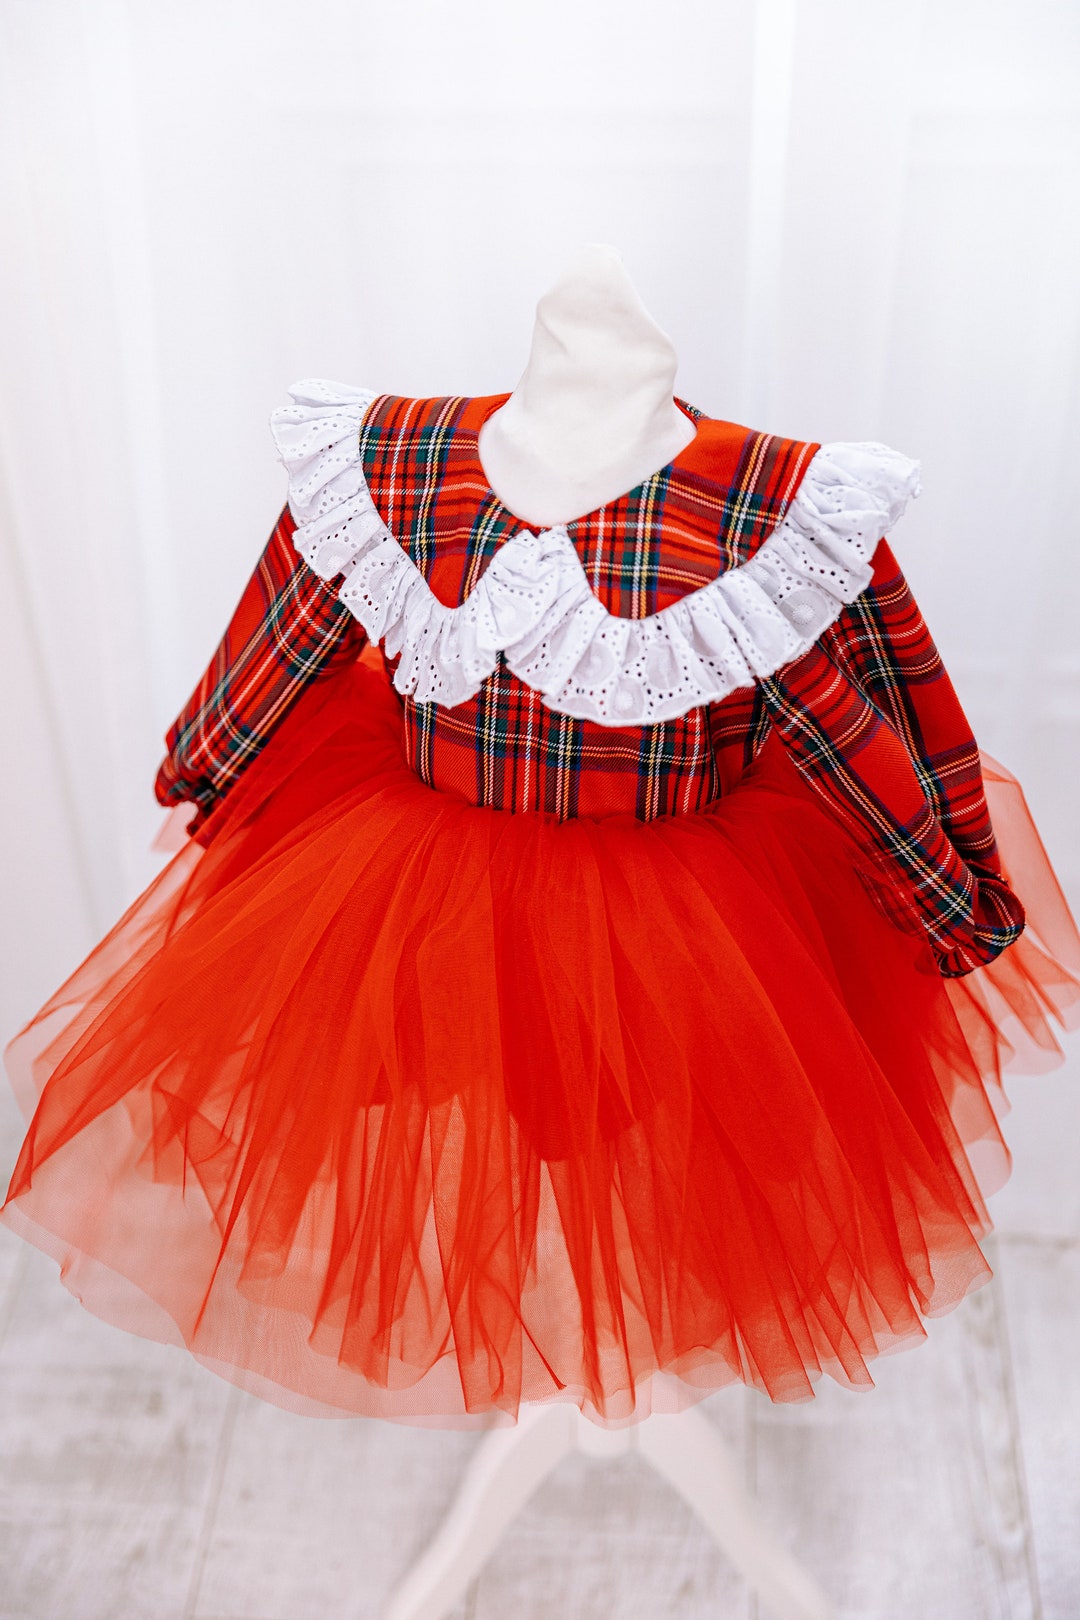 Baby Girl Christmas Gown, Red Plaid Dress for Christmas Photoshoot ...